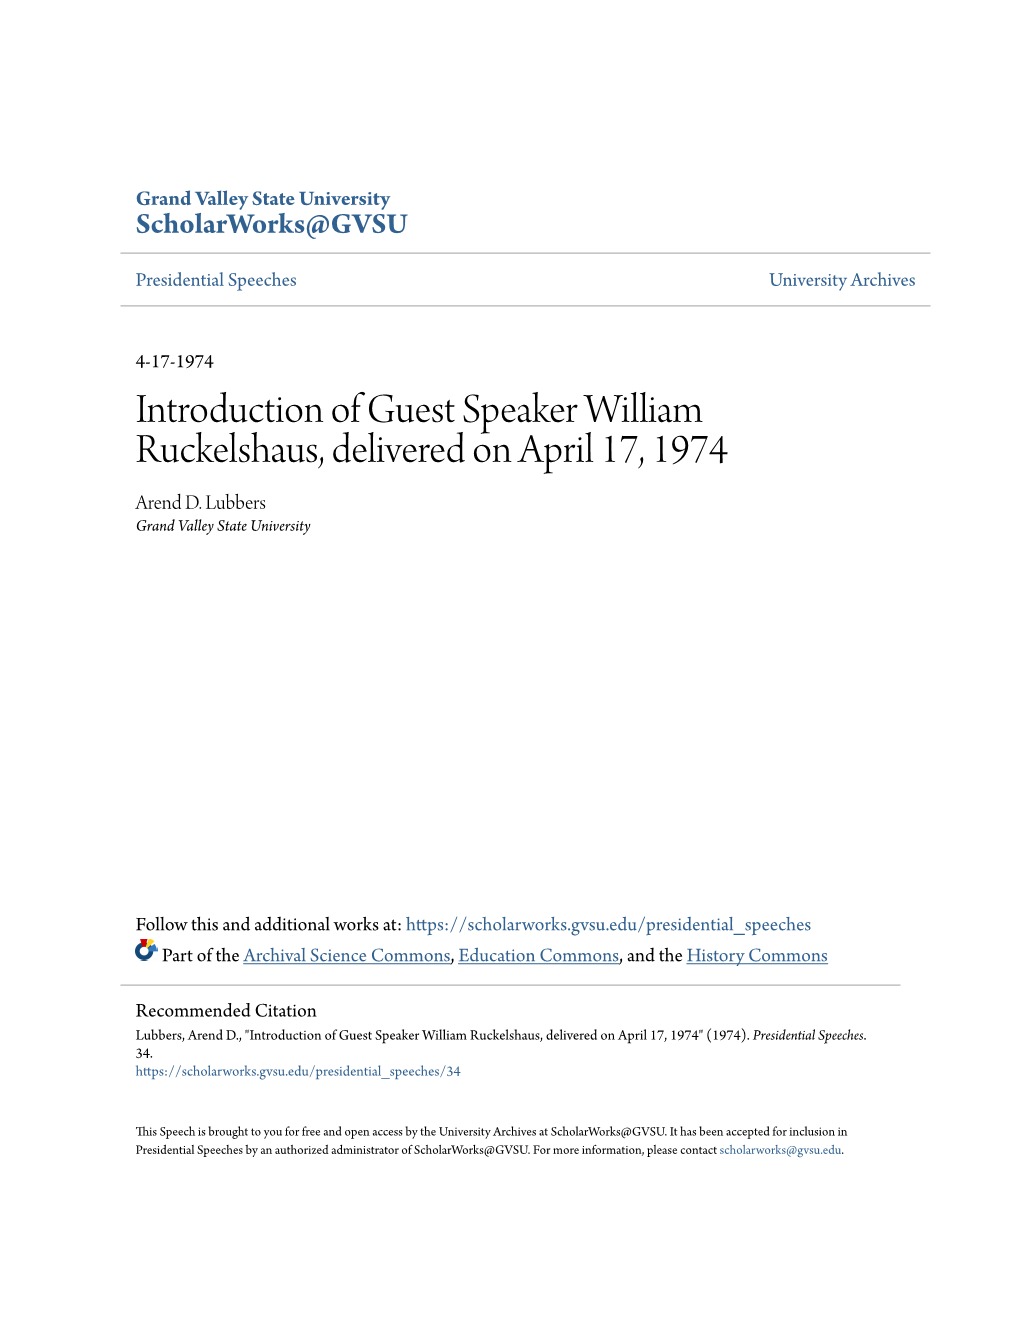 Introduction of Guest Speaker William Ruckelshaus, Delivered on April 17, 1974 Arend D